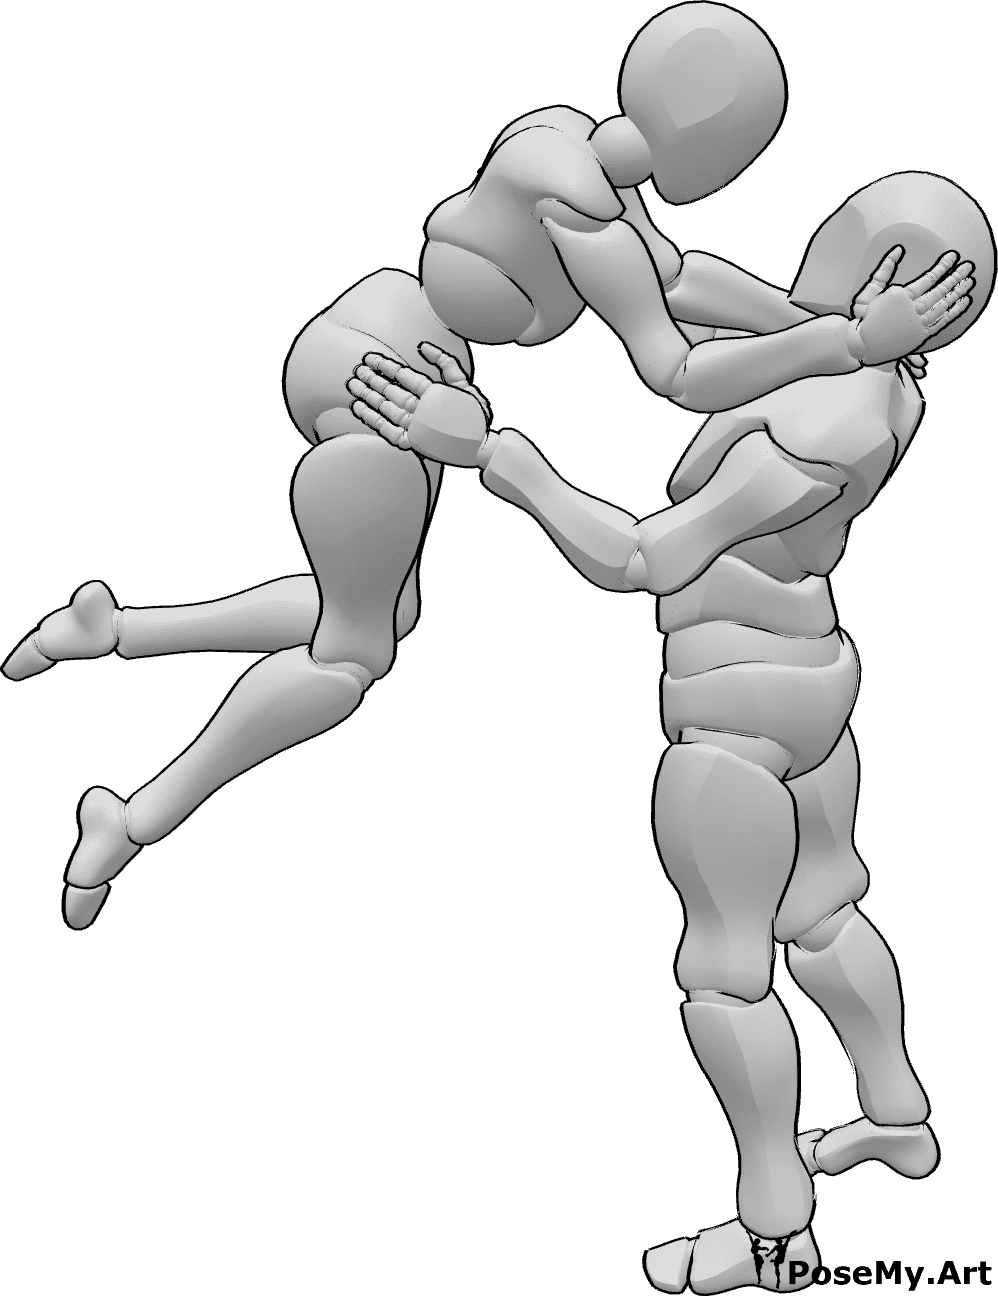 Pose Reference - man lifting woman in the air - man lifting woman in the air, woman puts her hand on man face